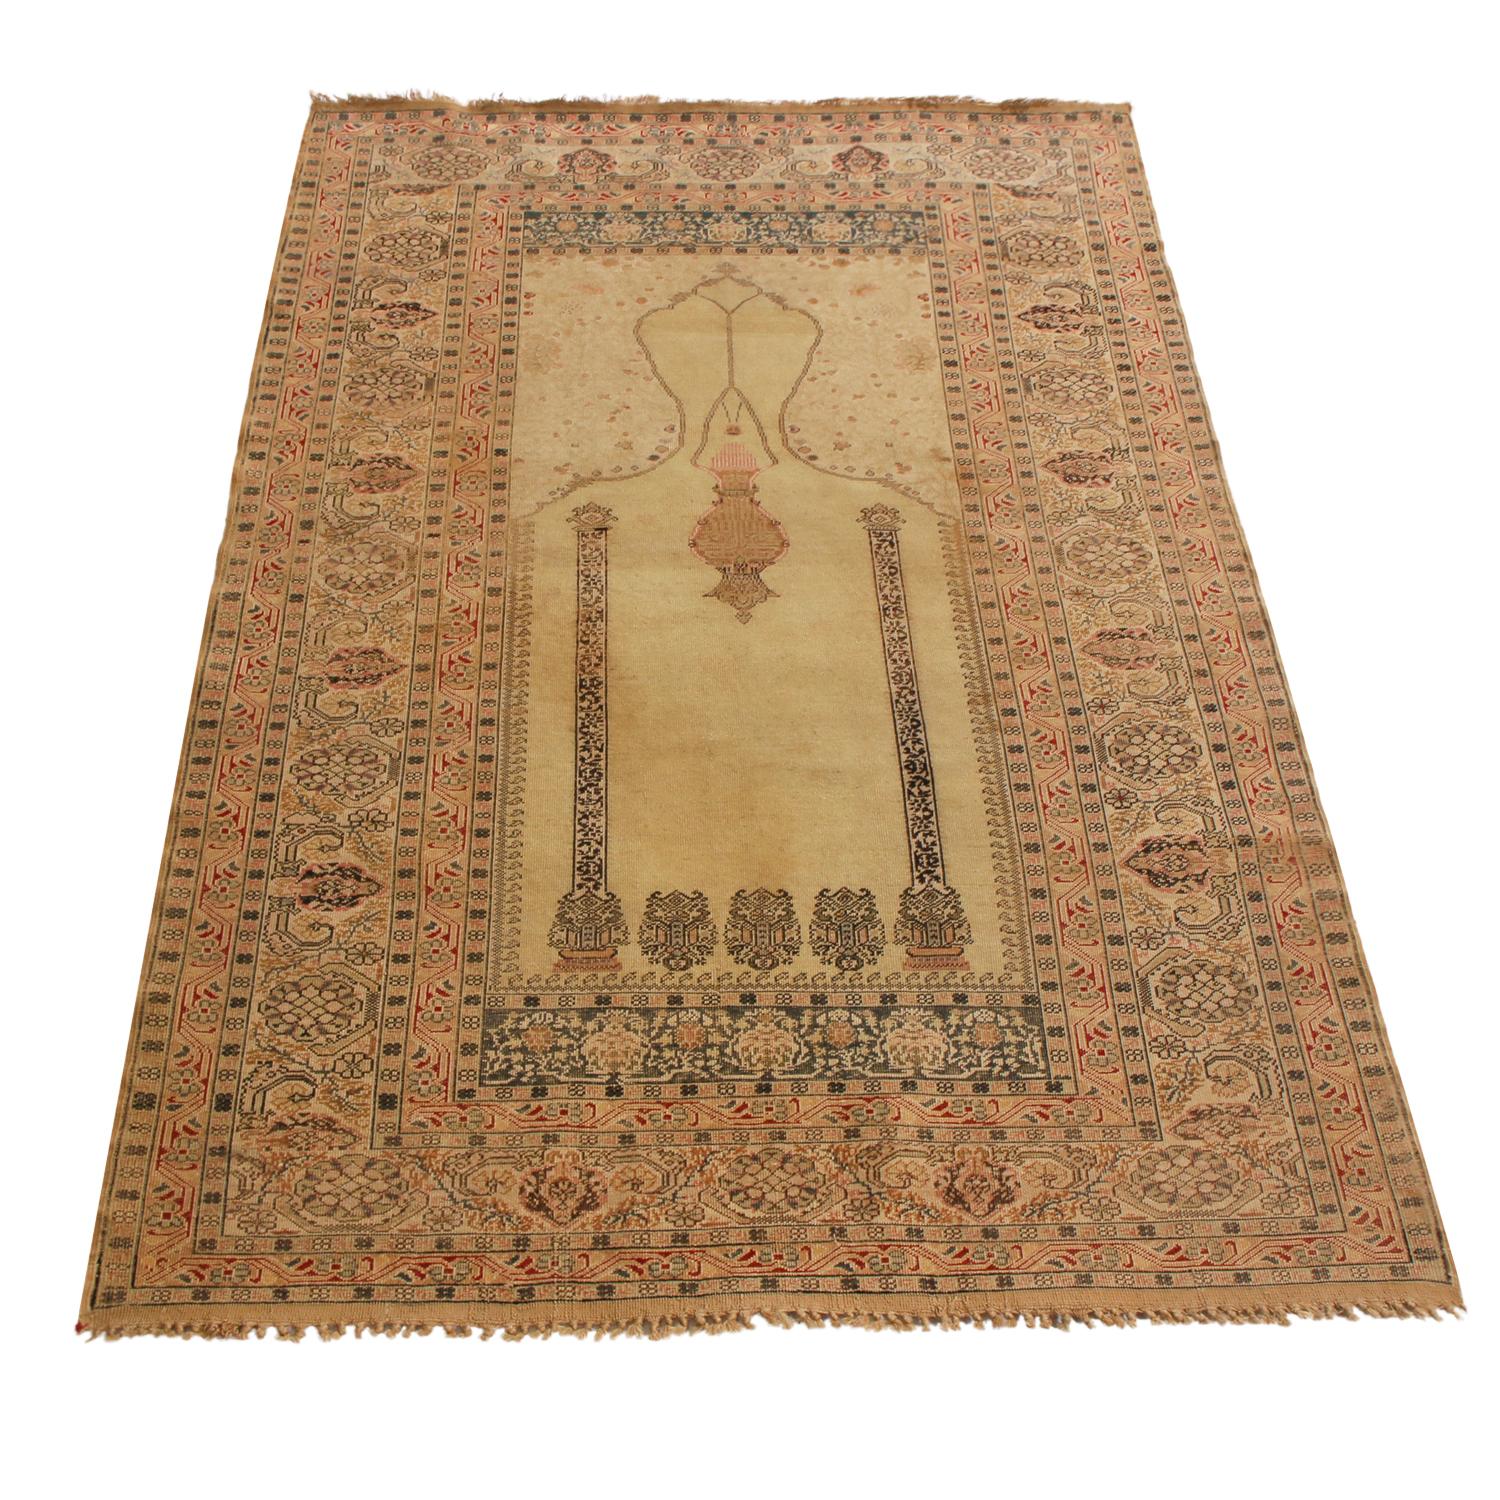 Hand knotted in high-quality wool originating from Turkey between 1880-1890, this antique Kayseri rug enjoys one of the most naturally luminous gold background, further accented by the sharpness of the chandalier’s detail, the uniquely spacious